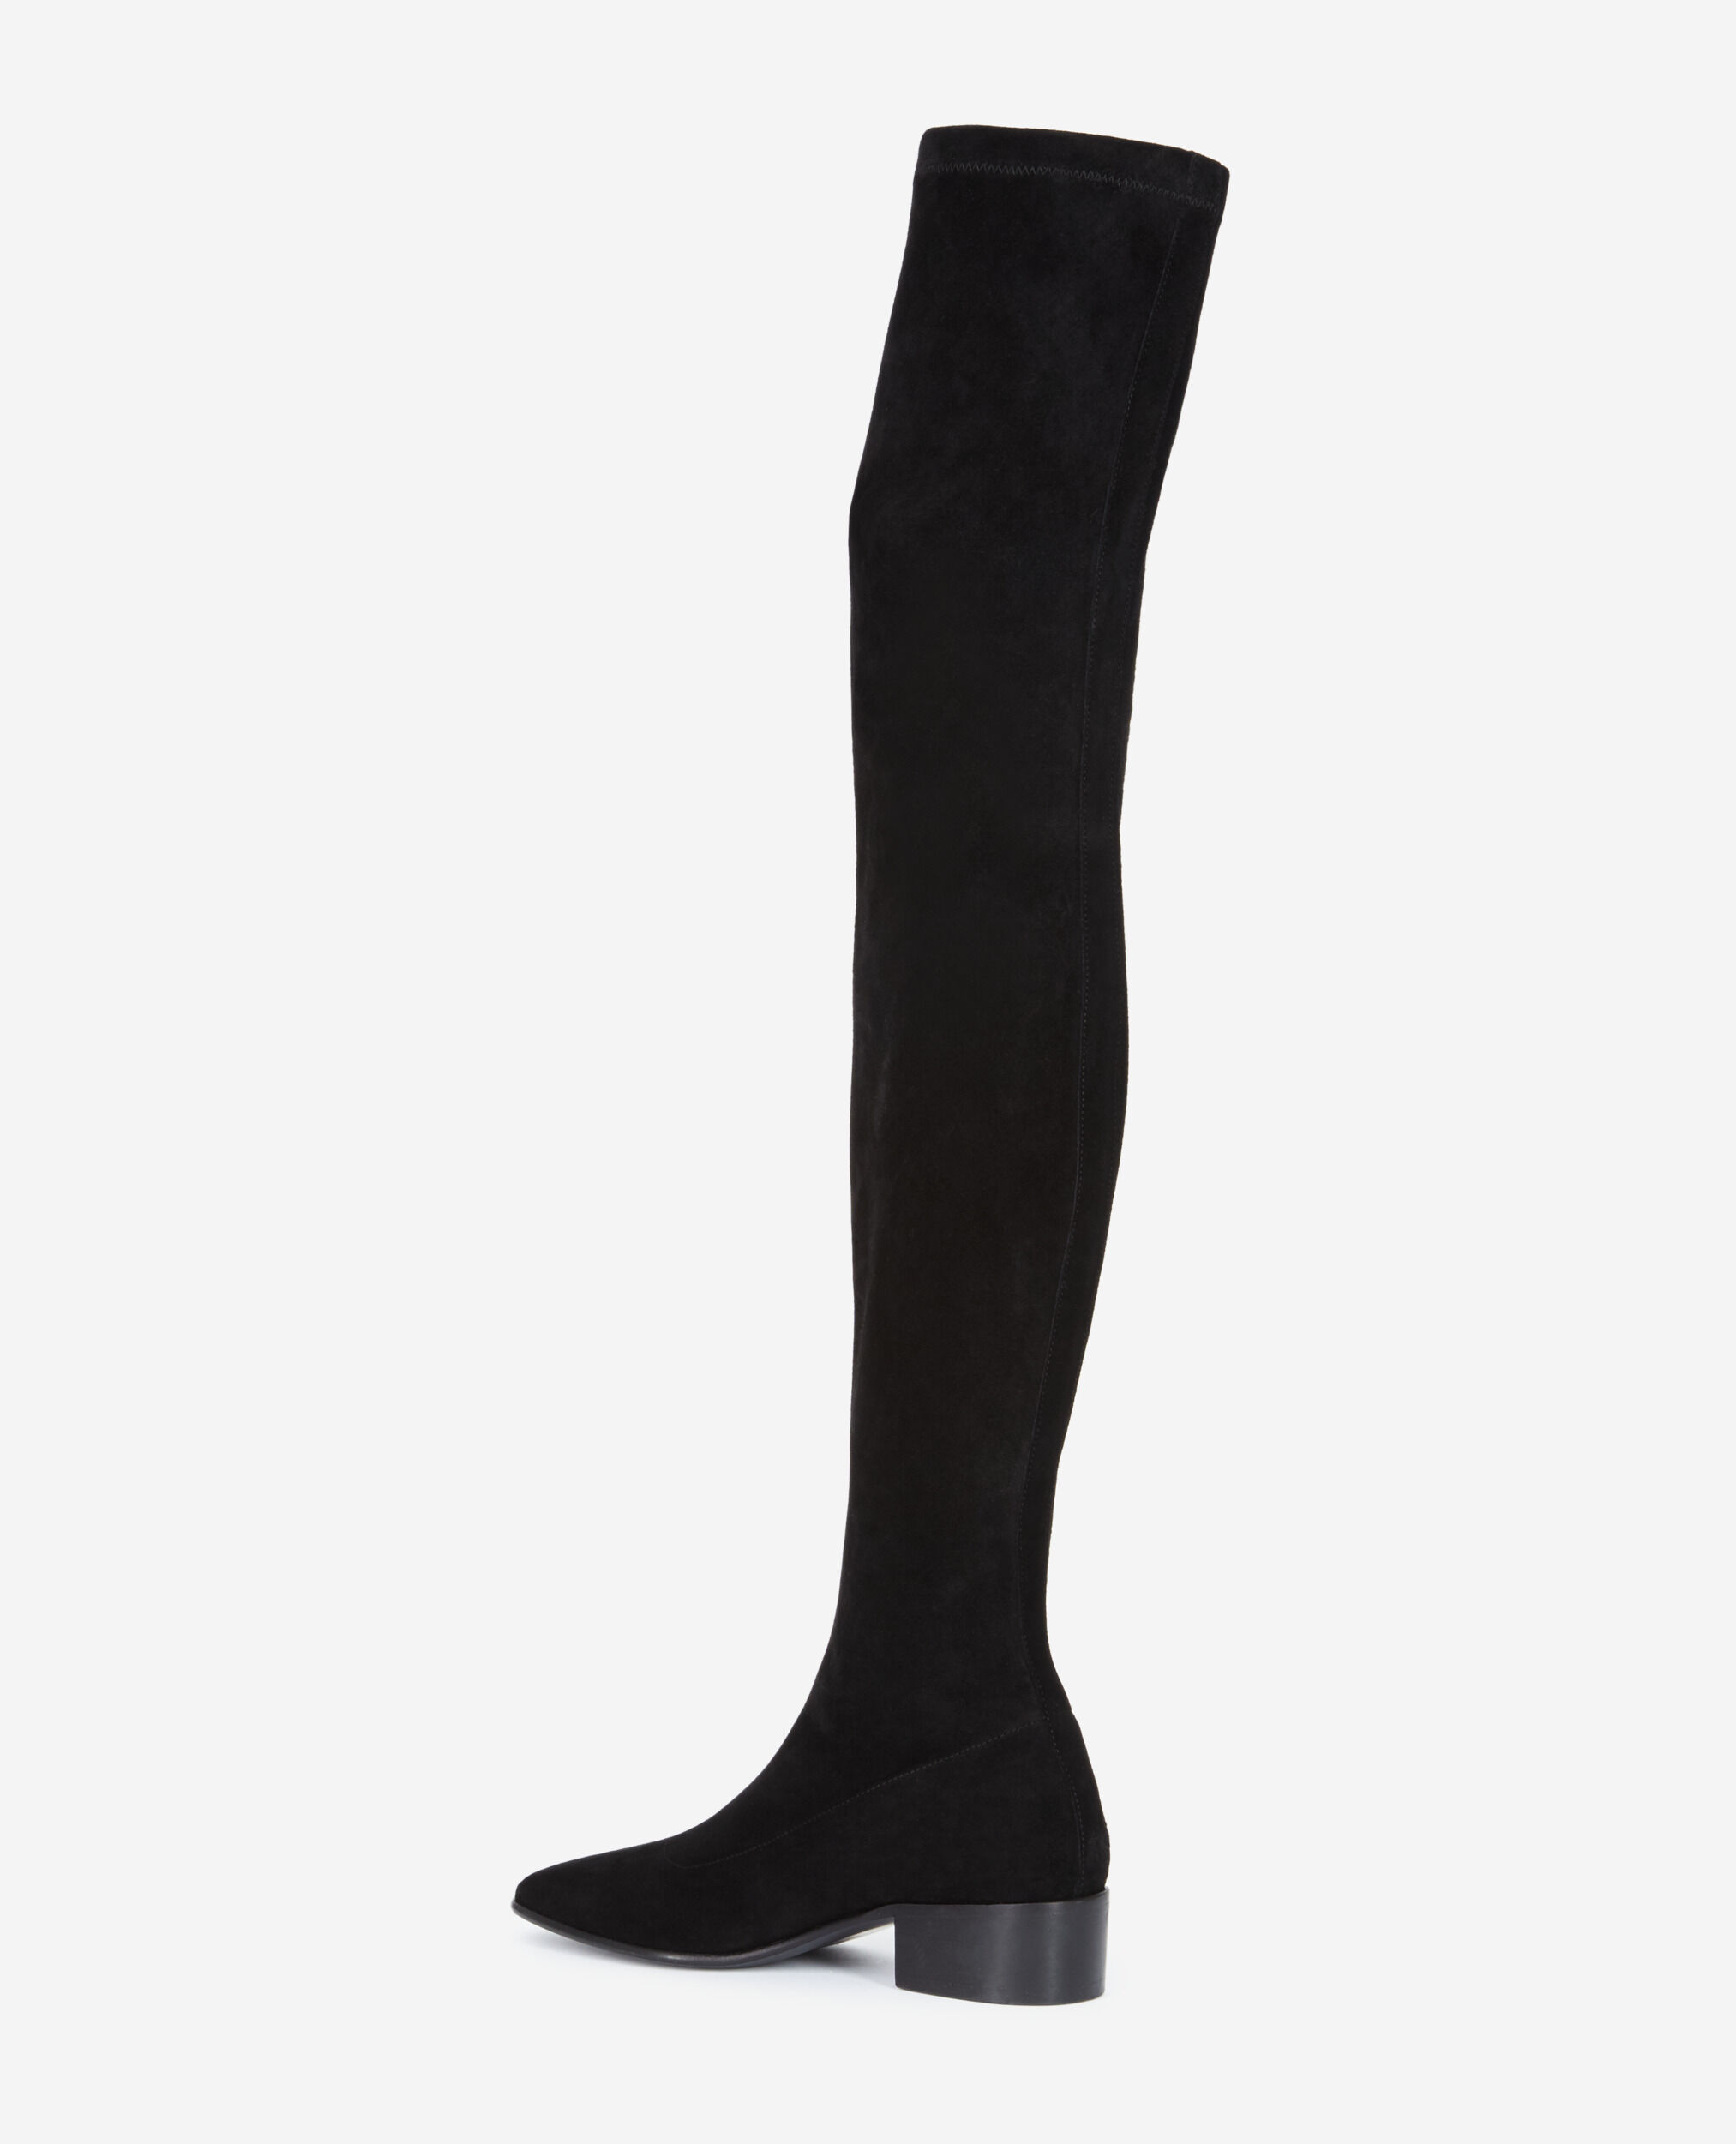 Black suede thigh-high boots, BLACK, hi-res image number null